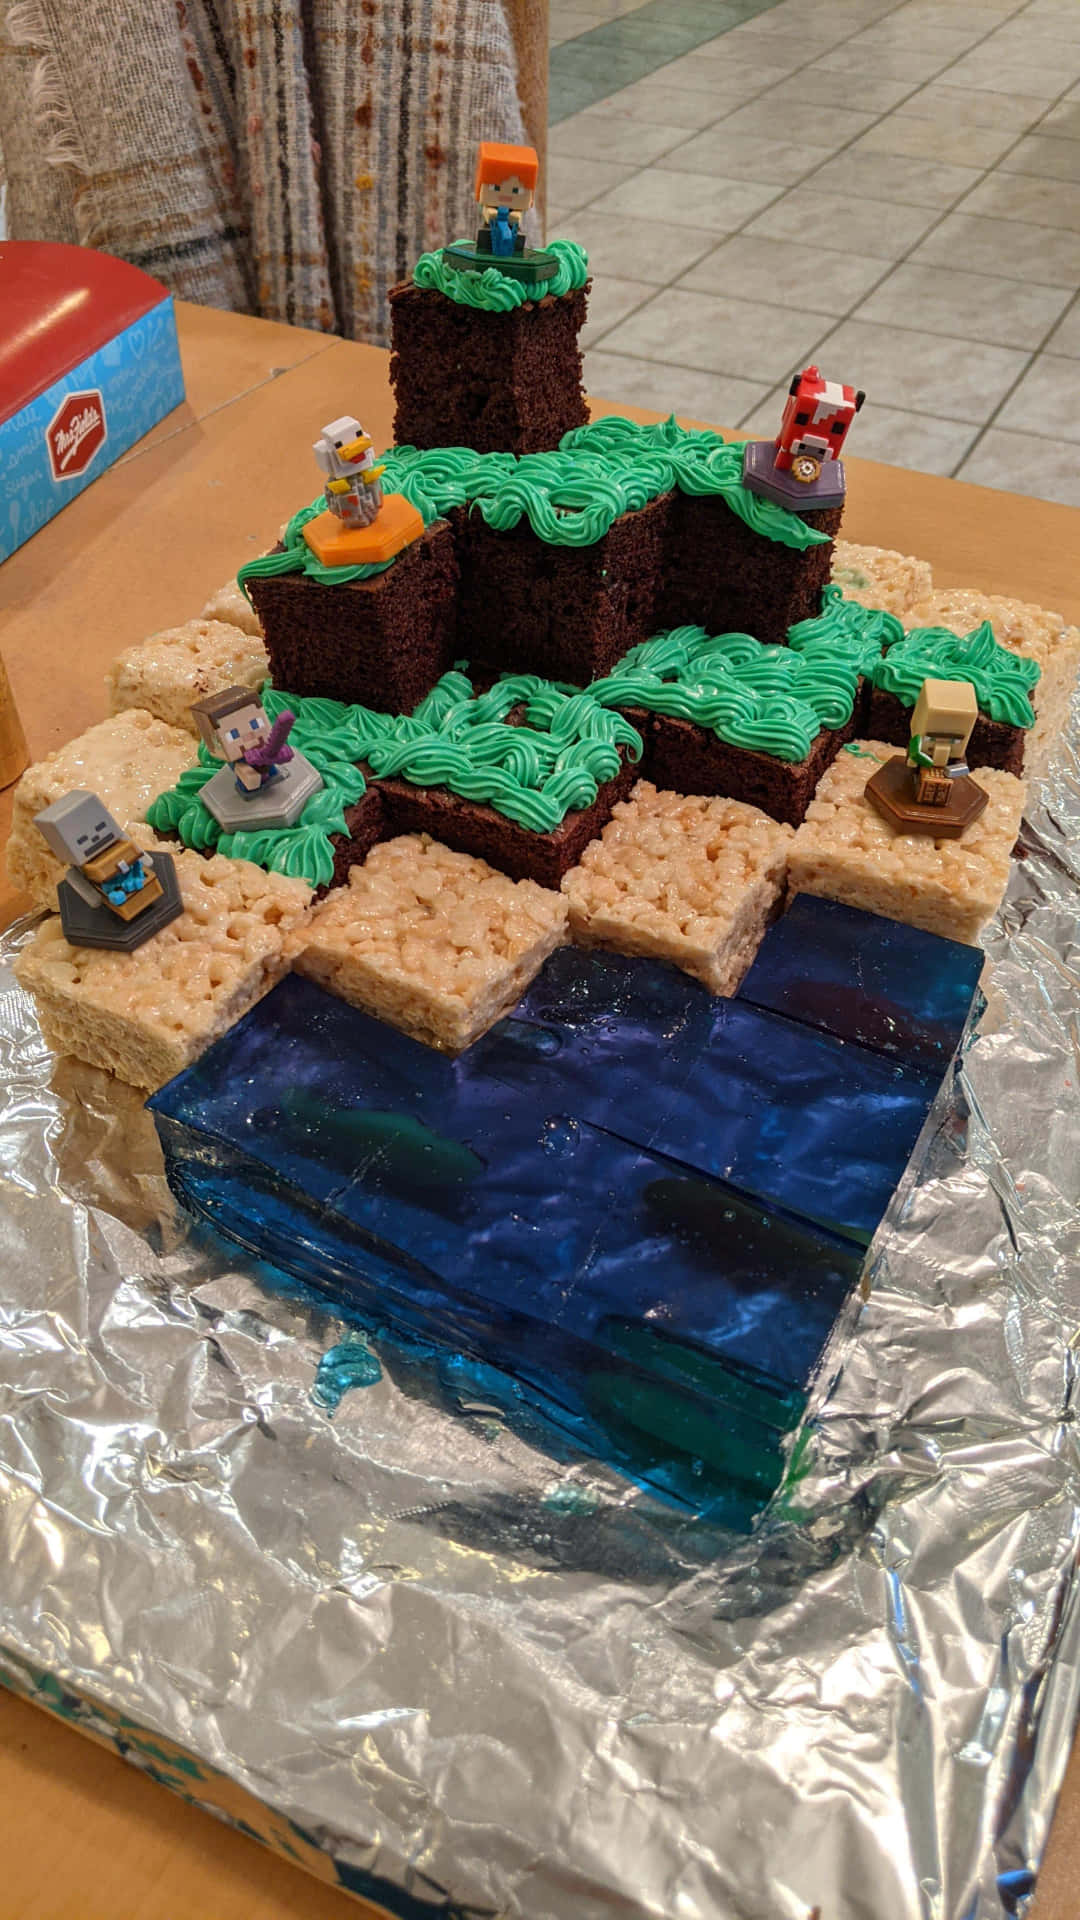 An Adorable Selection of Minecraft-Themed Cakes for Your Special Occasion